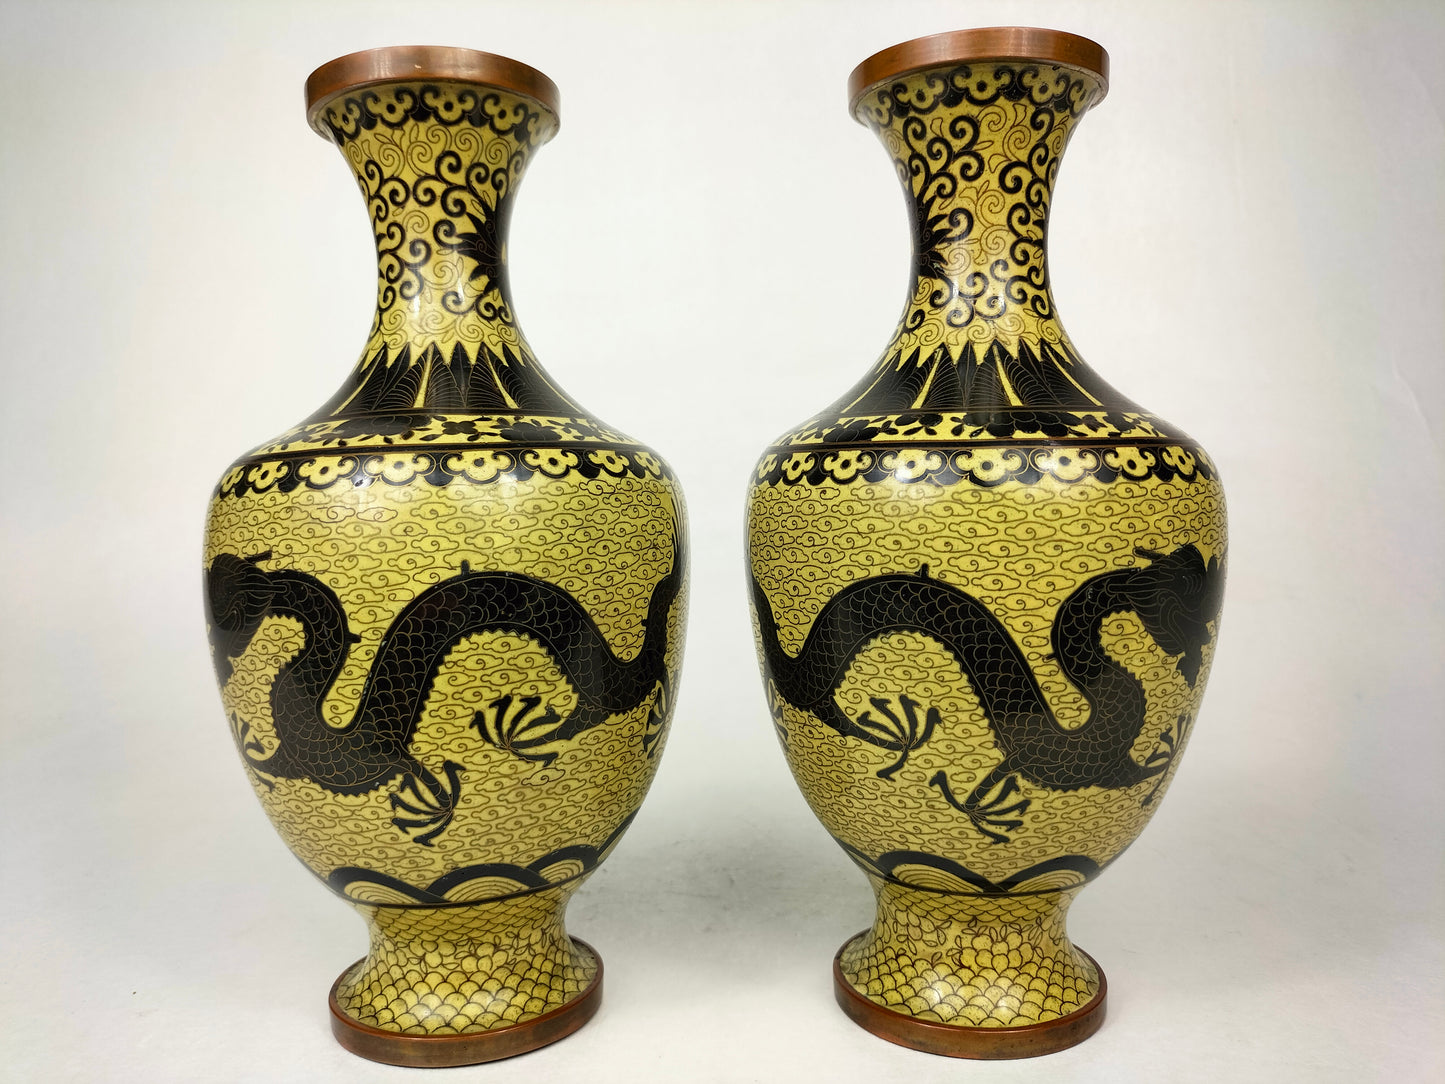 Pair of antique Japanese cloisonne vases with Imperial dragons // Early 20th century